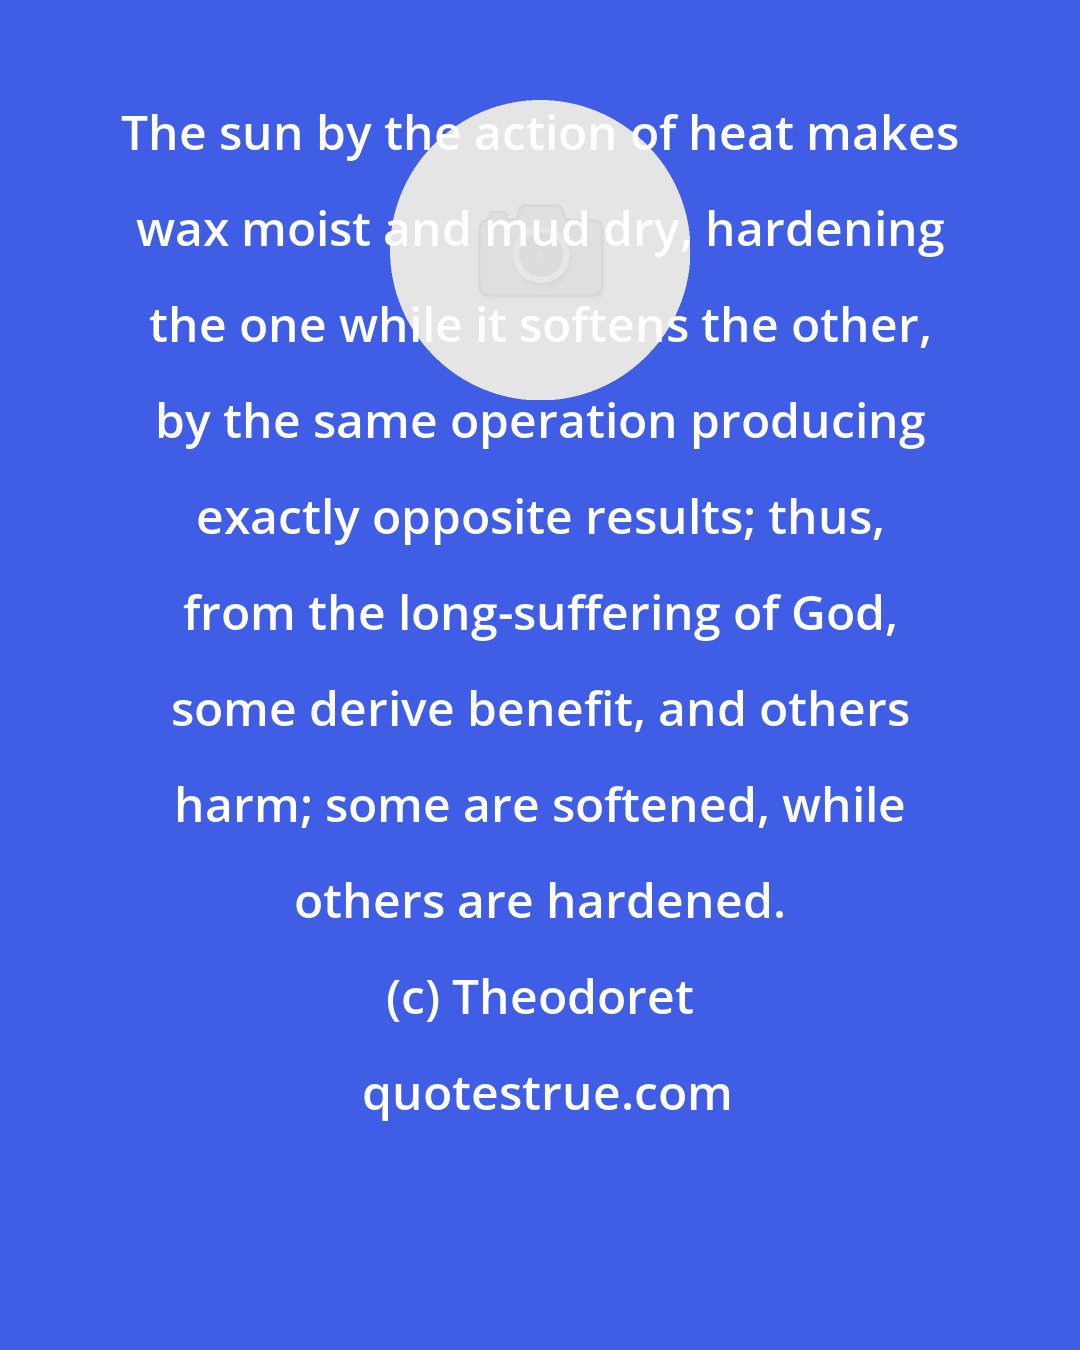 Theodoret: The sun by the action of heat makes wax moist and mud dry, hardening the one while it softens the other, by the same operation producing exactly opposite results; thus, from the long-suffering of God, some derive benefit, and others harm; some are softened, while others are hardened.